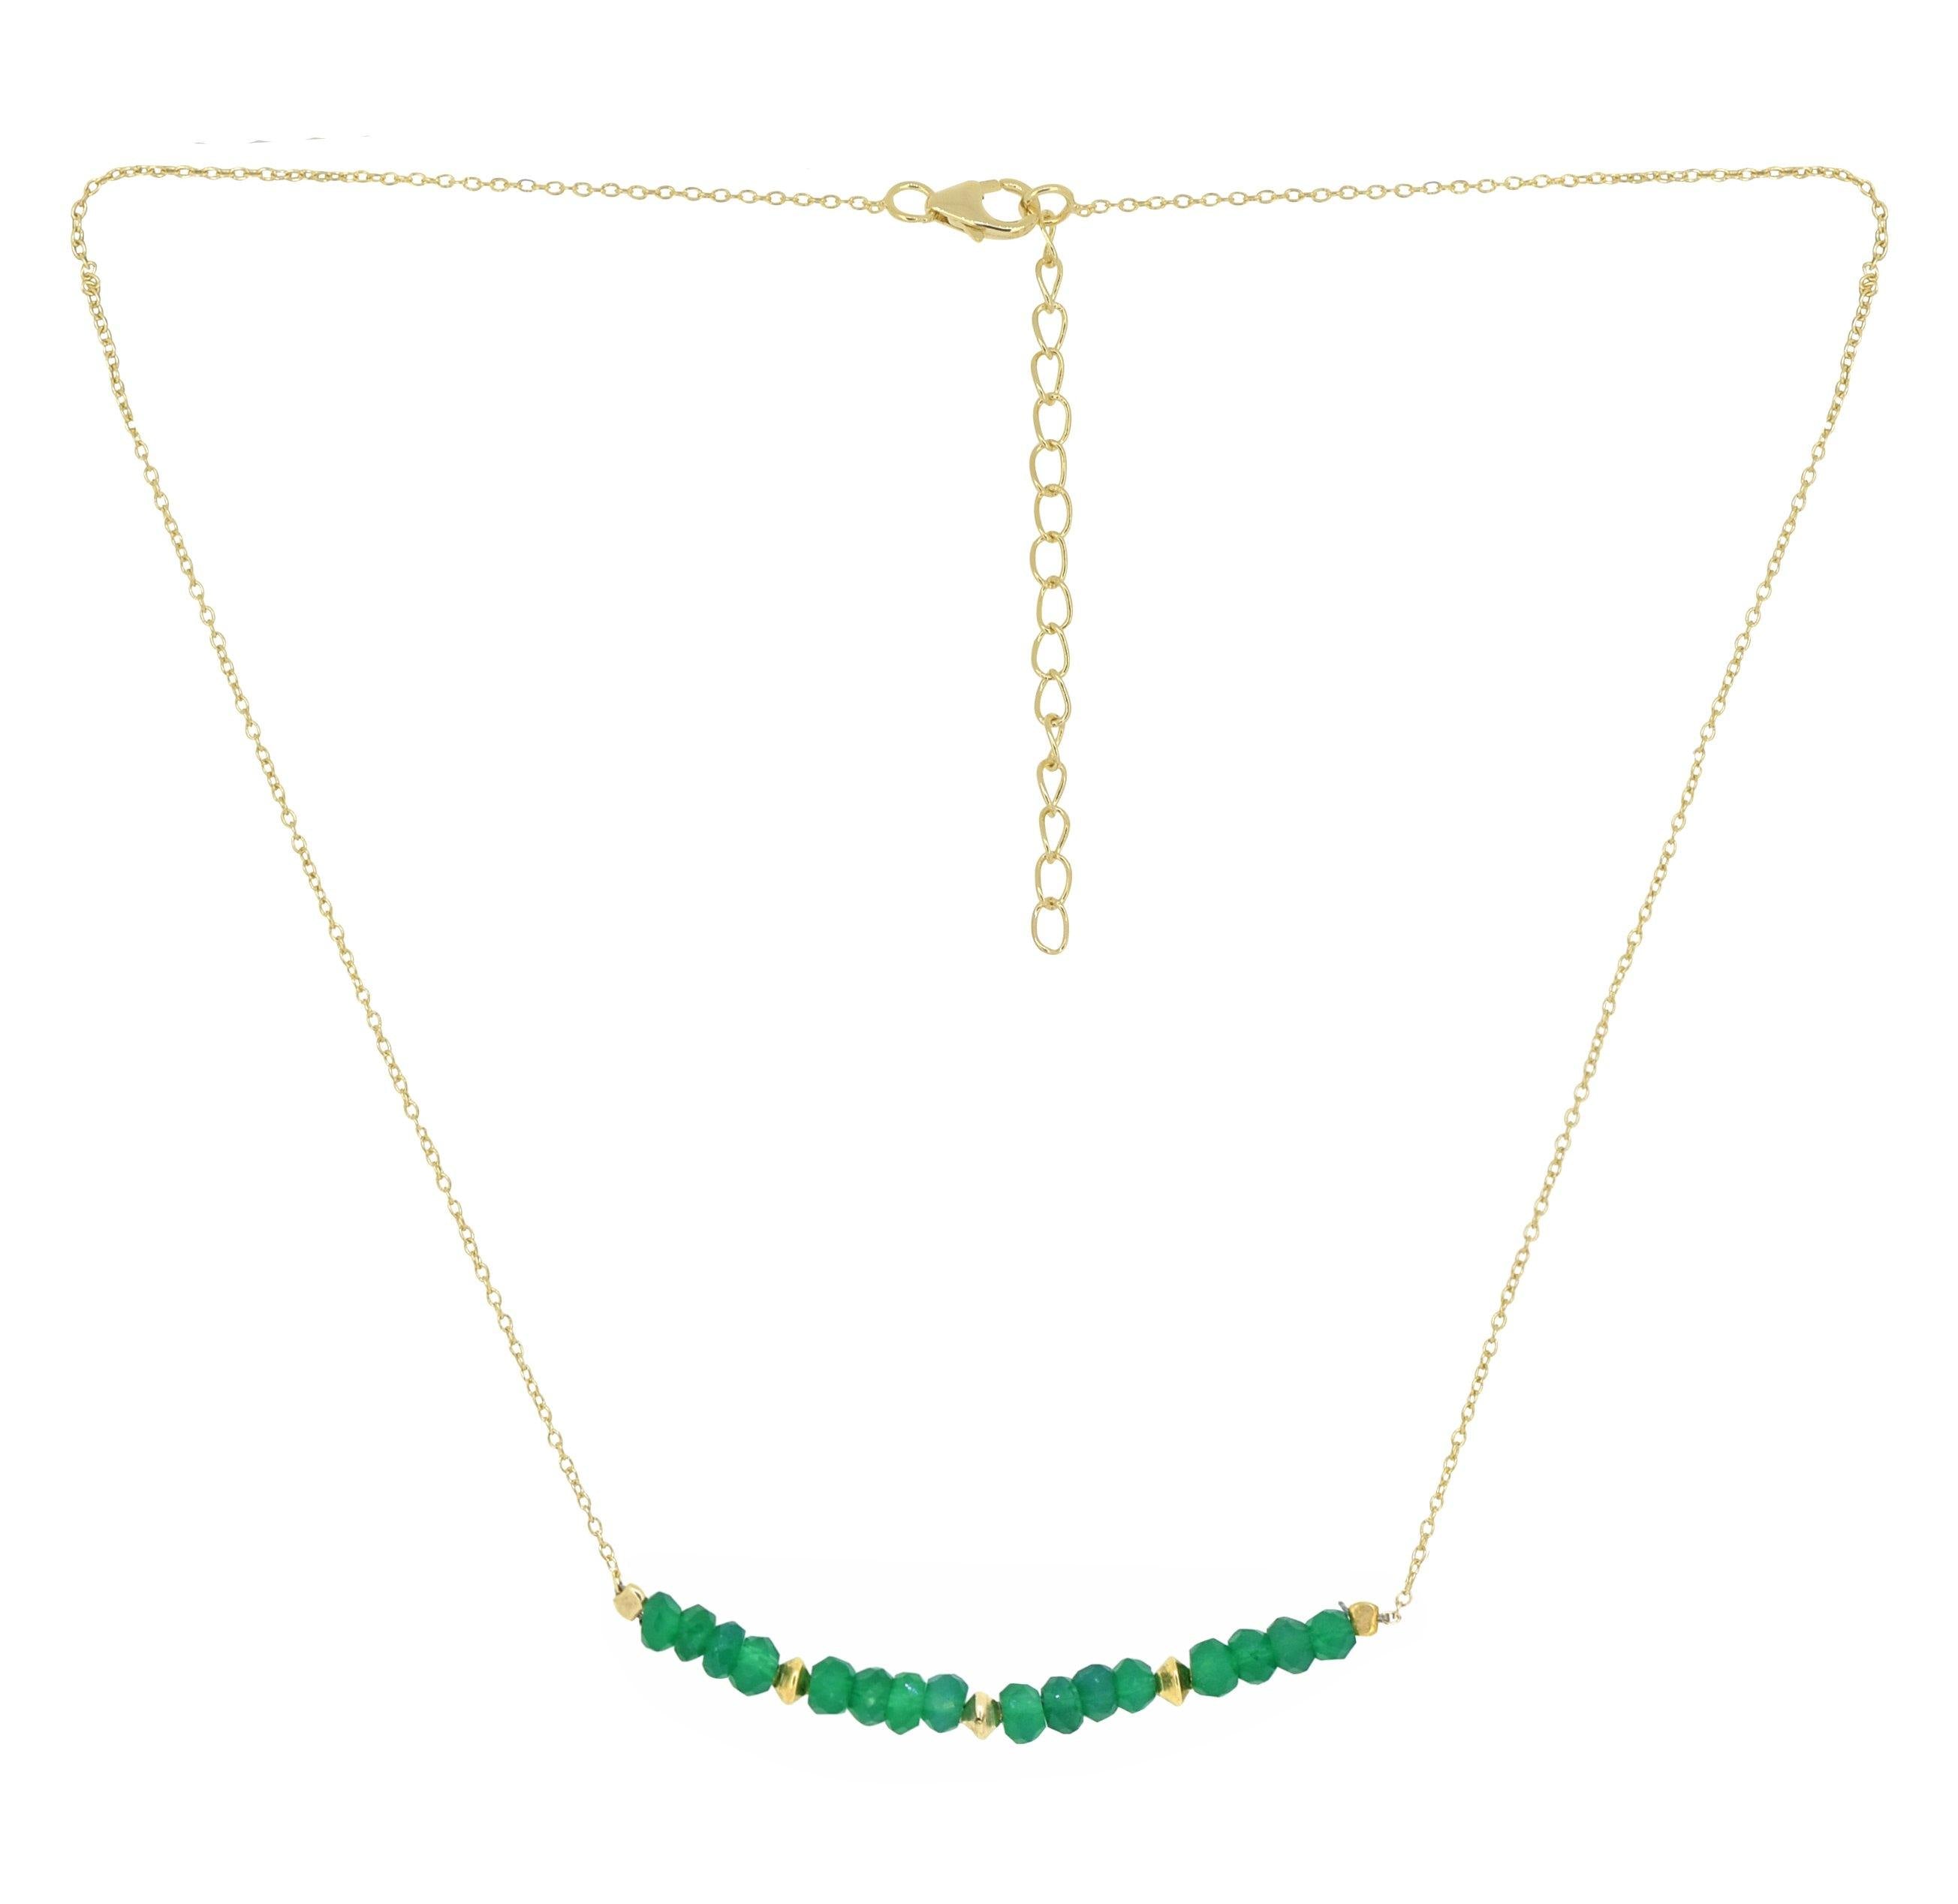 Green Onyx Solid 925 Sterling Silver Gold Plated Chain Pendant Necklace Jewelry - YoTreasure